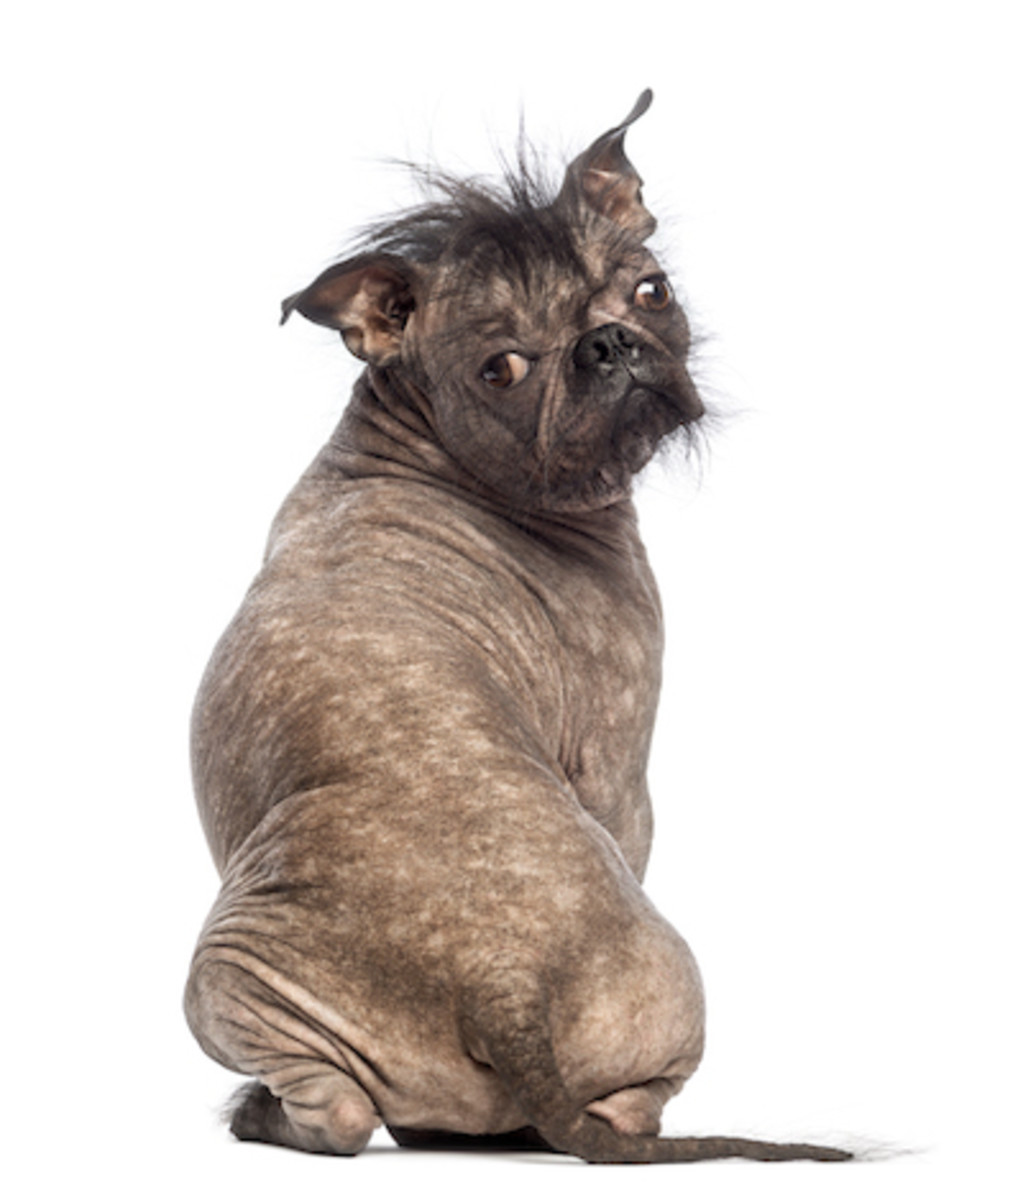 50 Ugly Dog Breeds You'll Love - Parade